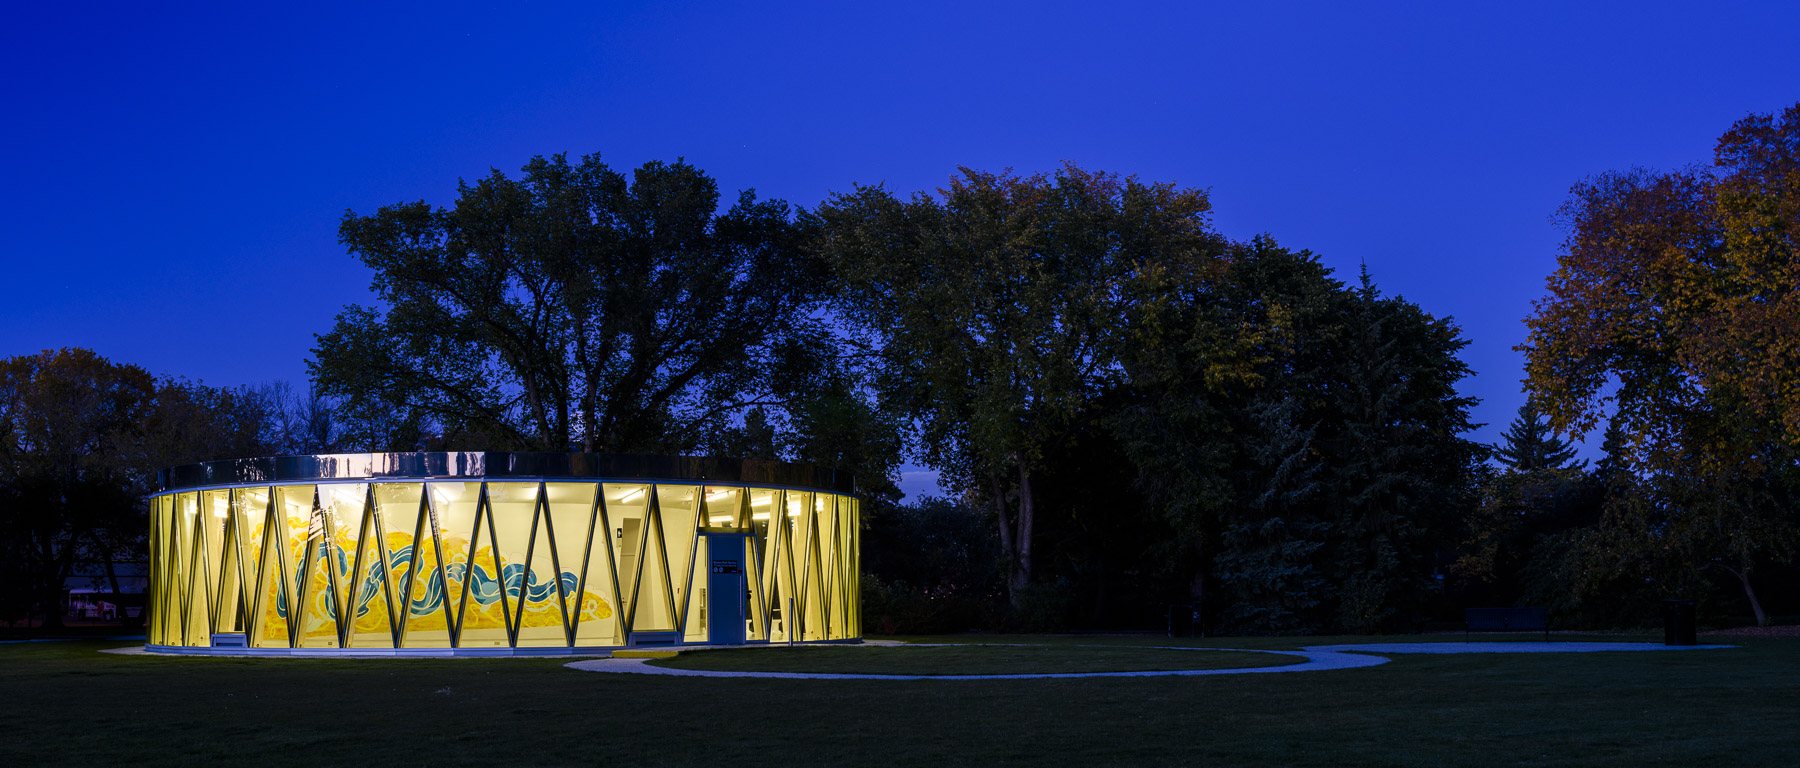 Borden Park pavilion by GH3 Architects photographed by Redline Photography